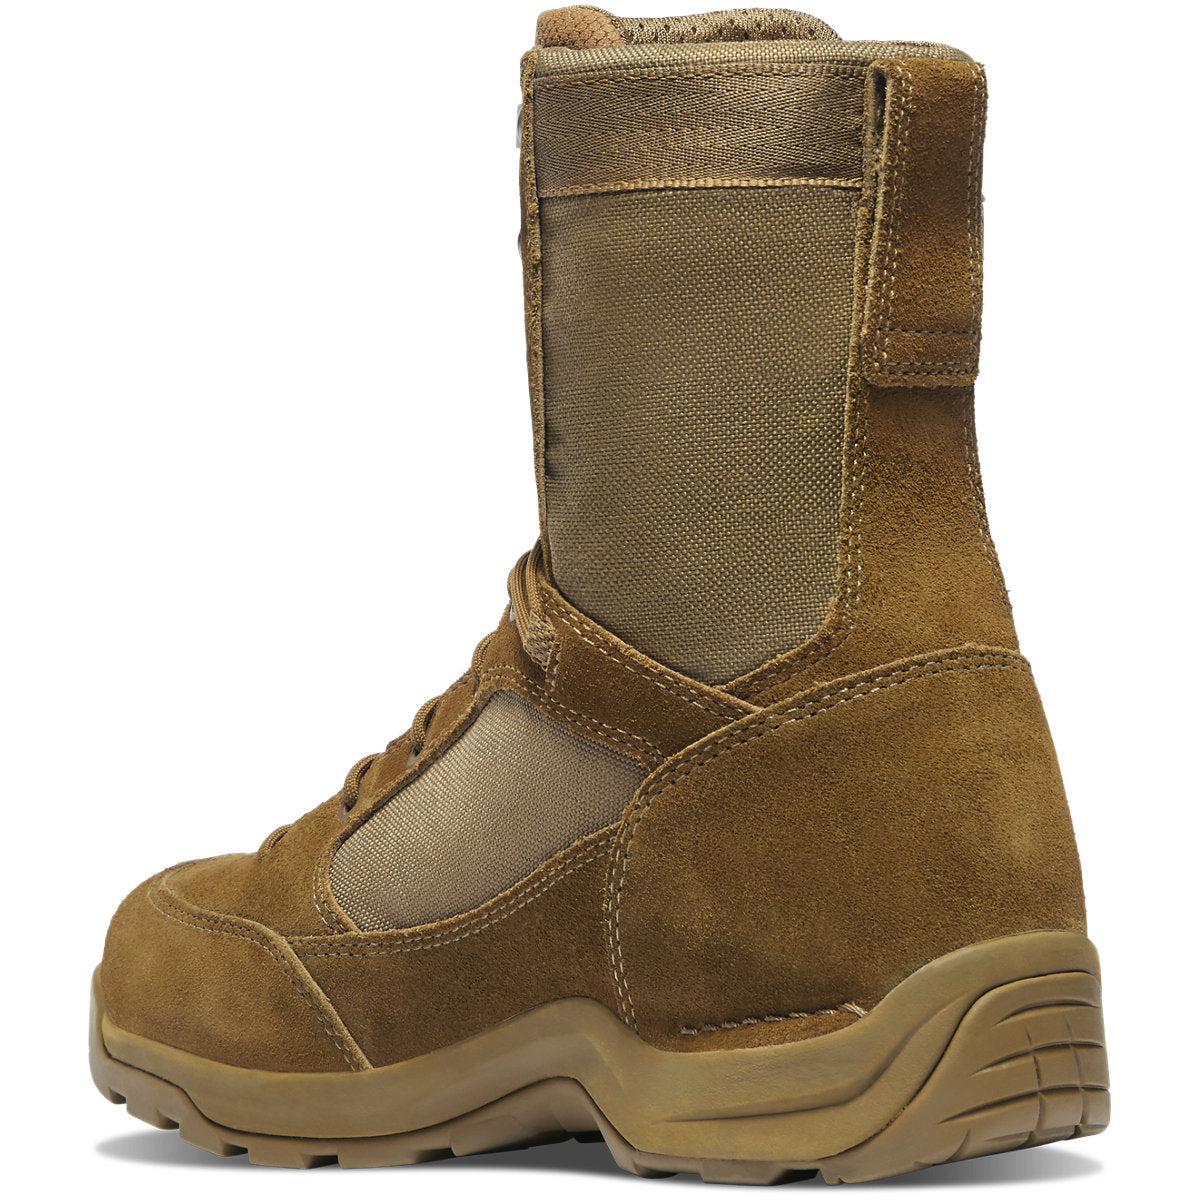 Desert TFX G3 8" GTX Military Boots: Waterproof, breathable GORE-TEX technology for moisture prevention in any environment.